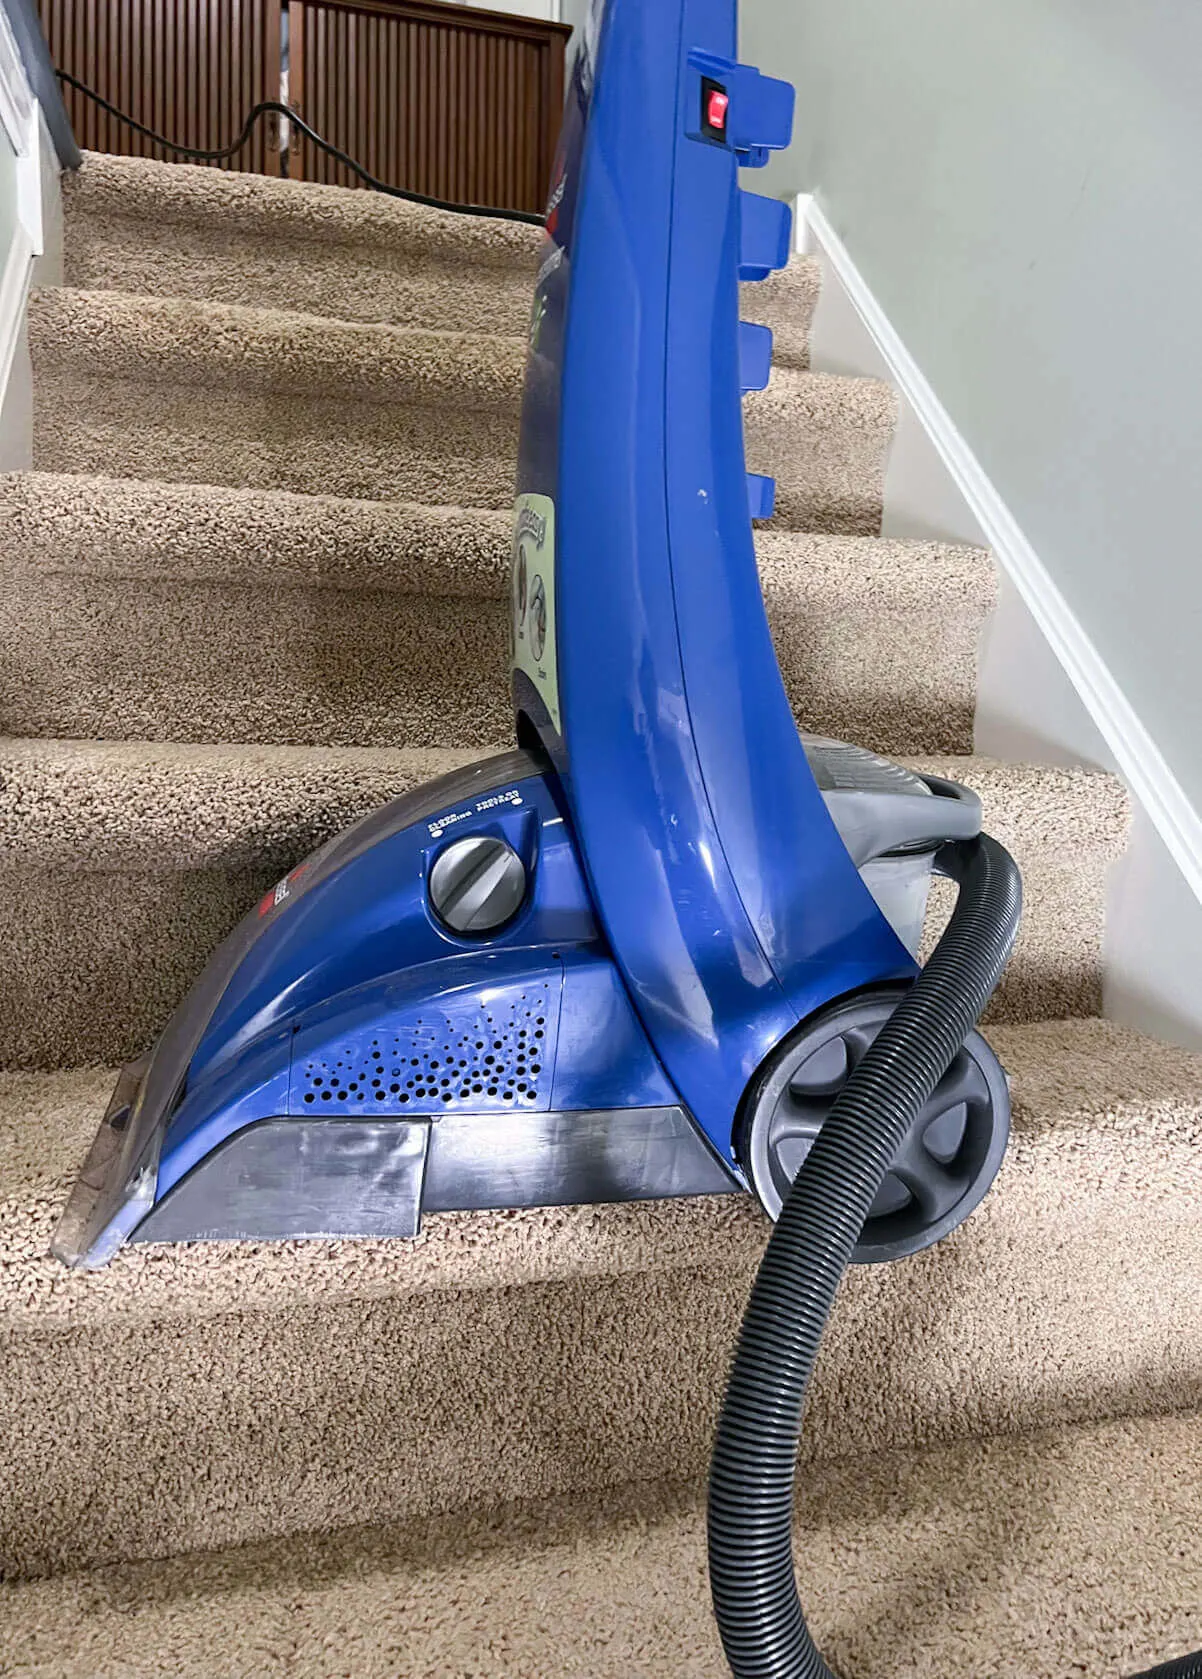 upright Bissel Steam cleaner on steps with hose attachment.